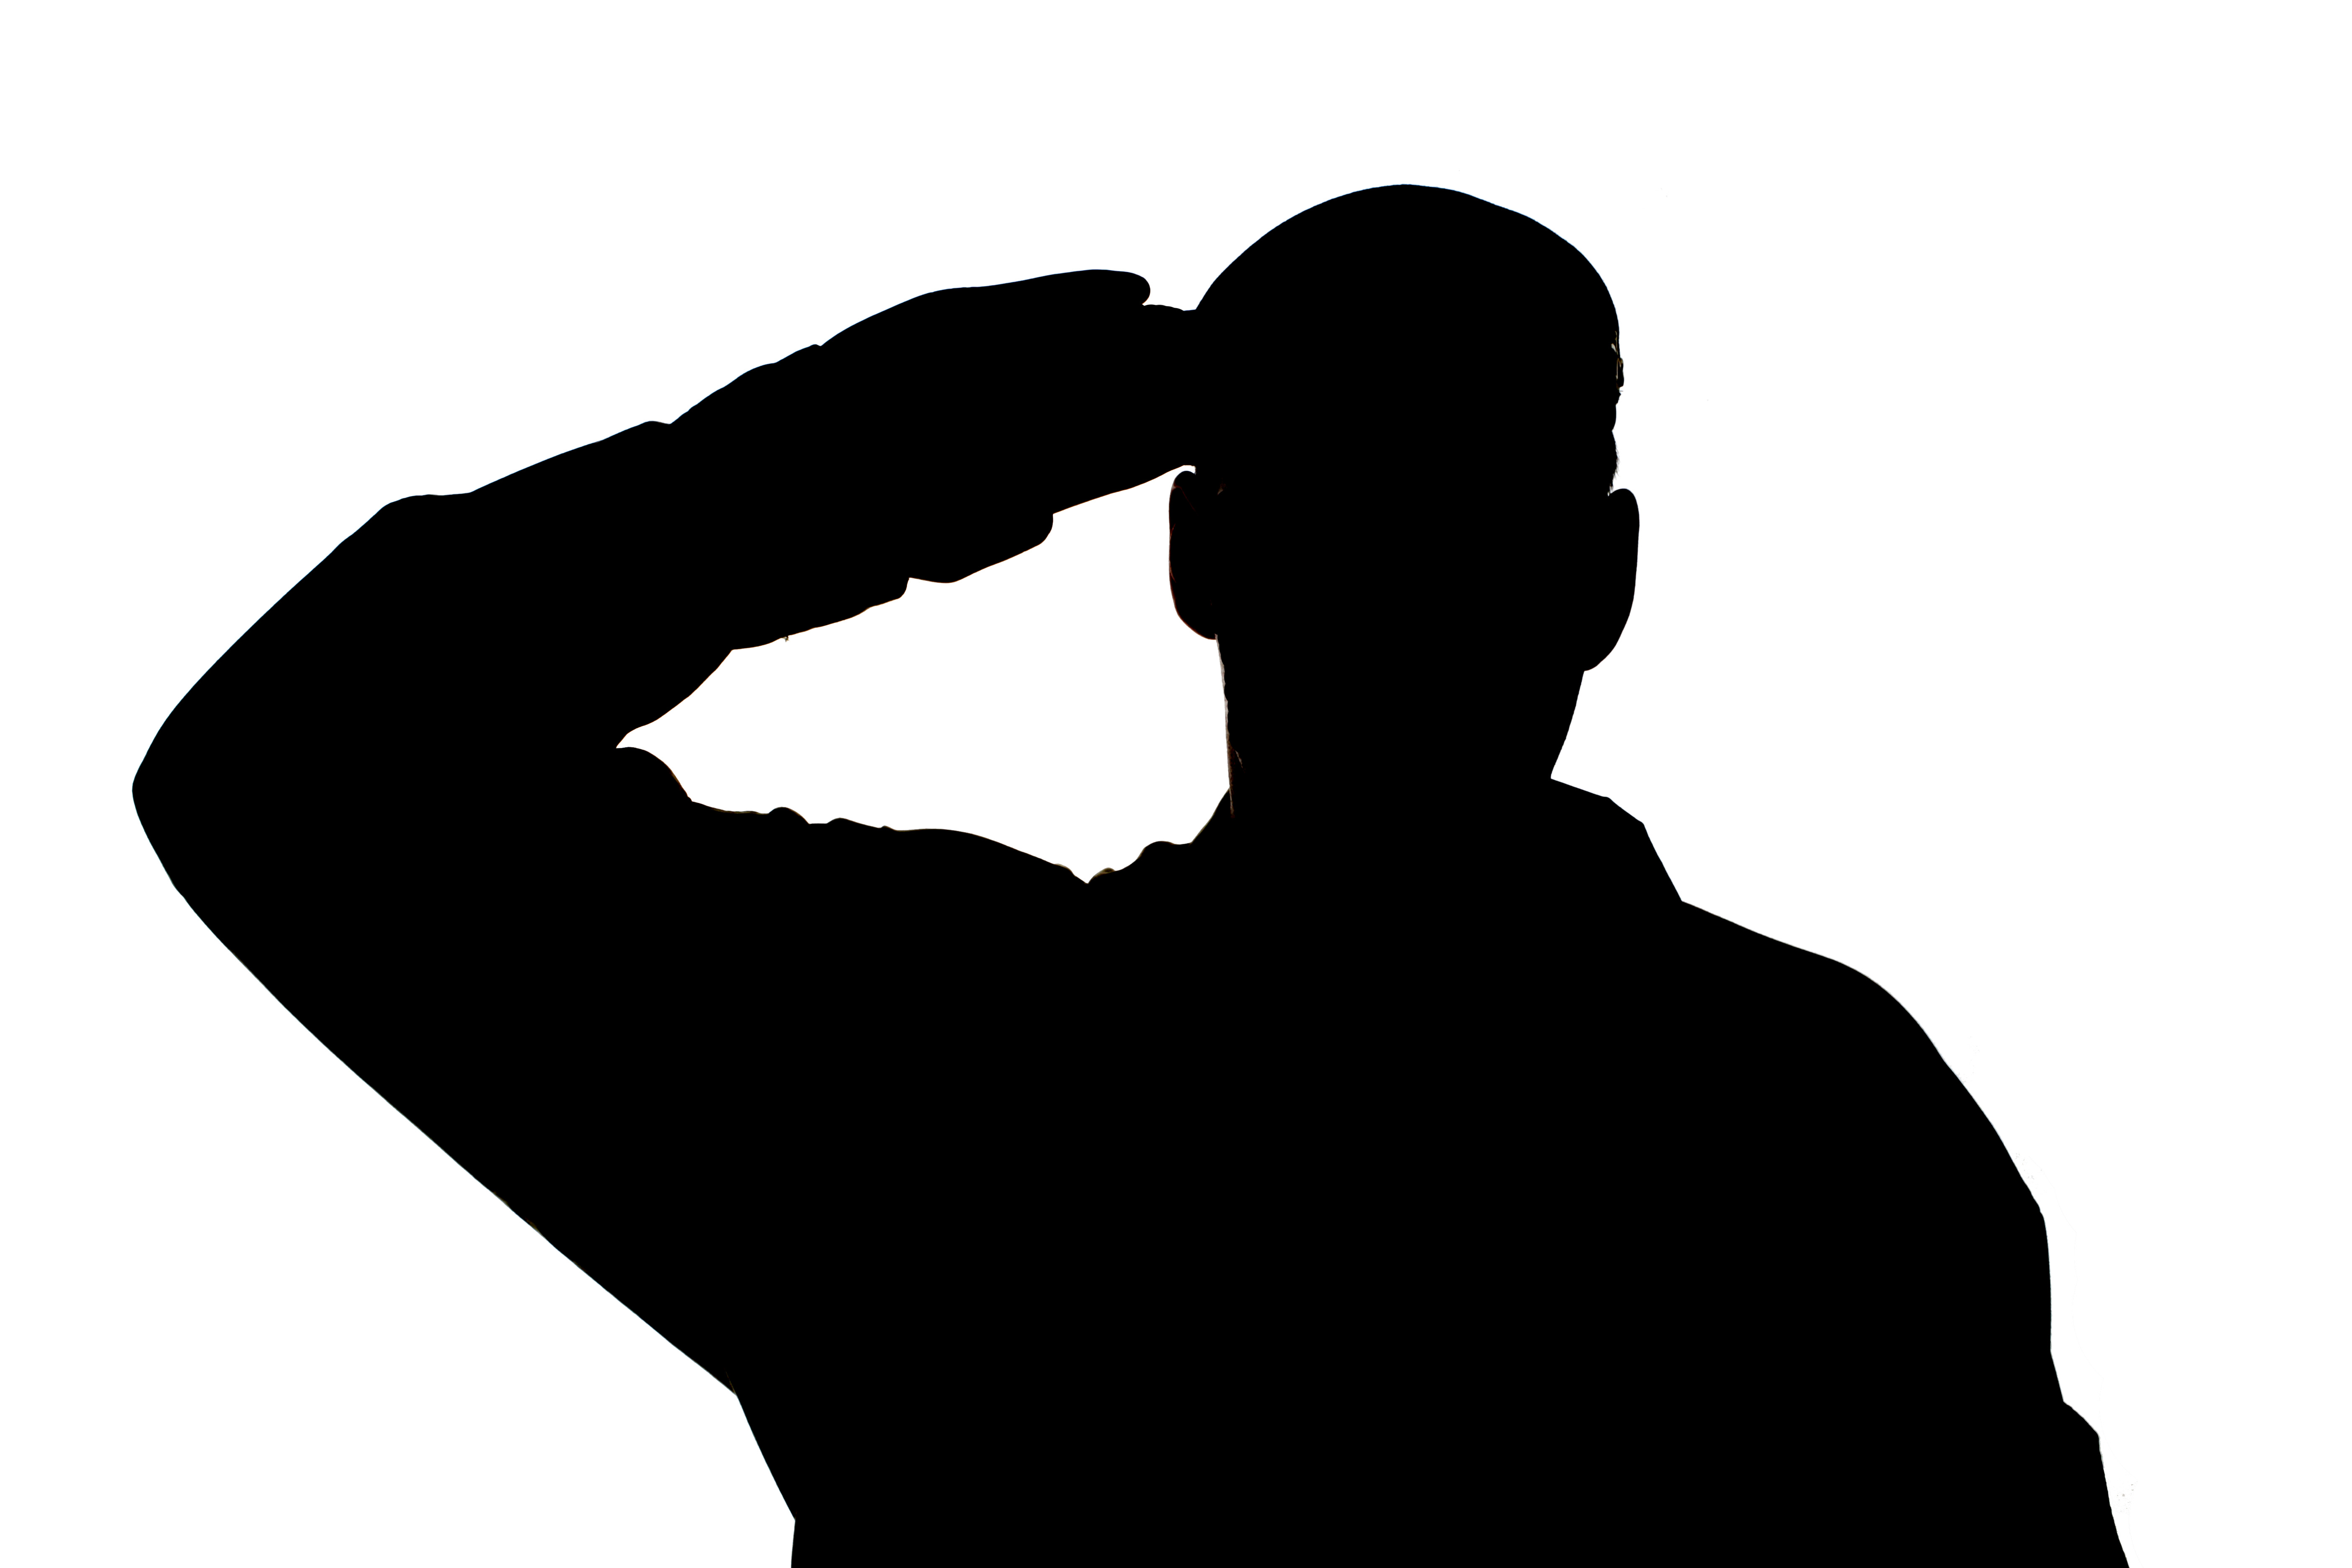 File:British Army Soldier Saluting MOD 45154892.jpg - Wikimedia Commons